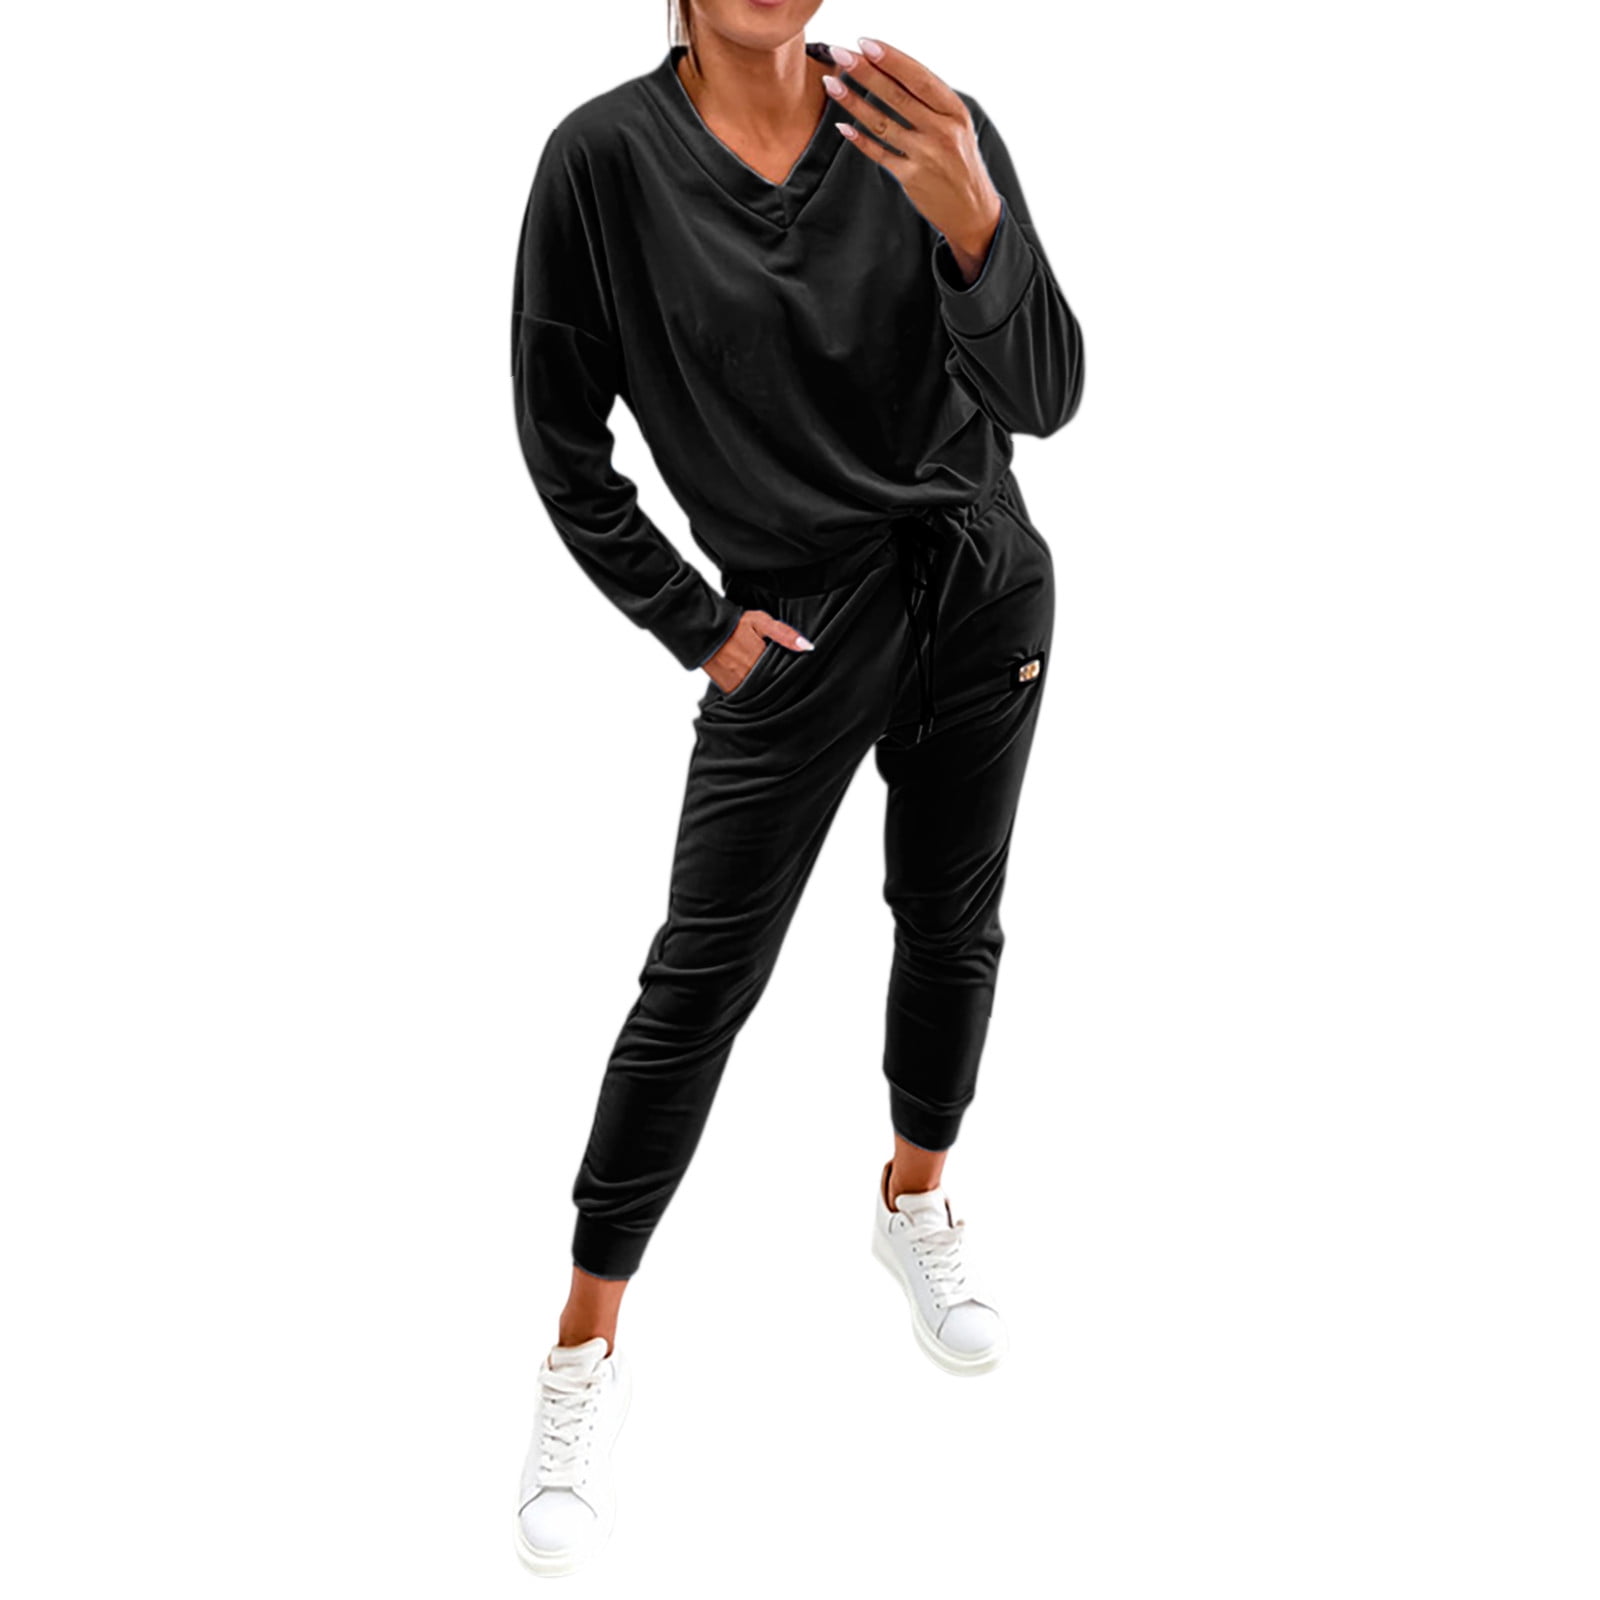 TOWED22 Womens Sets 2 Piece Outfits,Women's Casual 2 Piece Tracksuit Outfit  Ribbed Crop Top Jogger Pants Matching Sets Sweatsuit(Black,XL) 